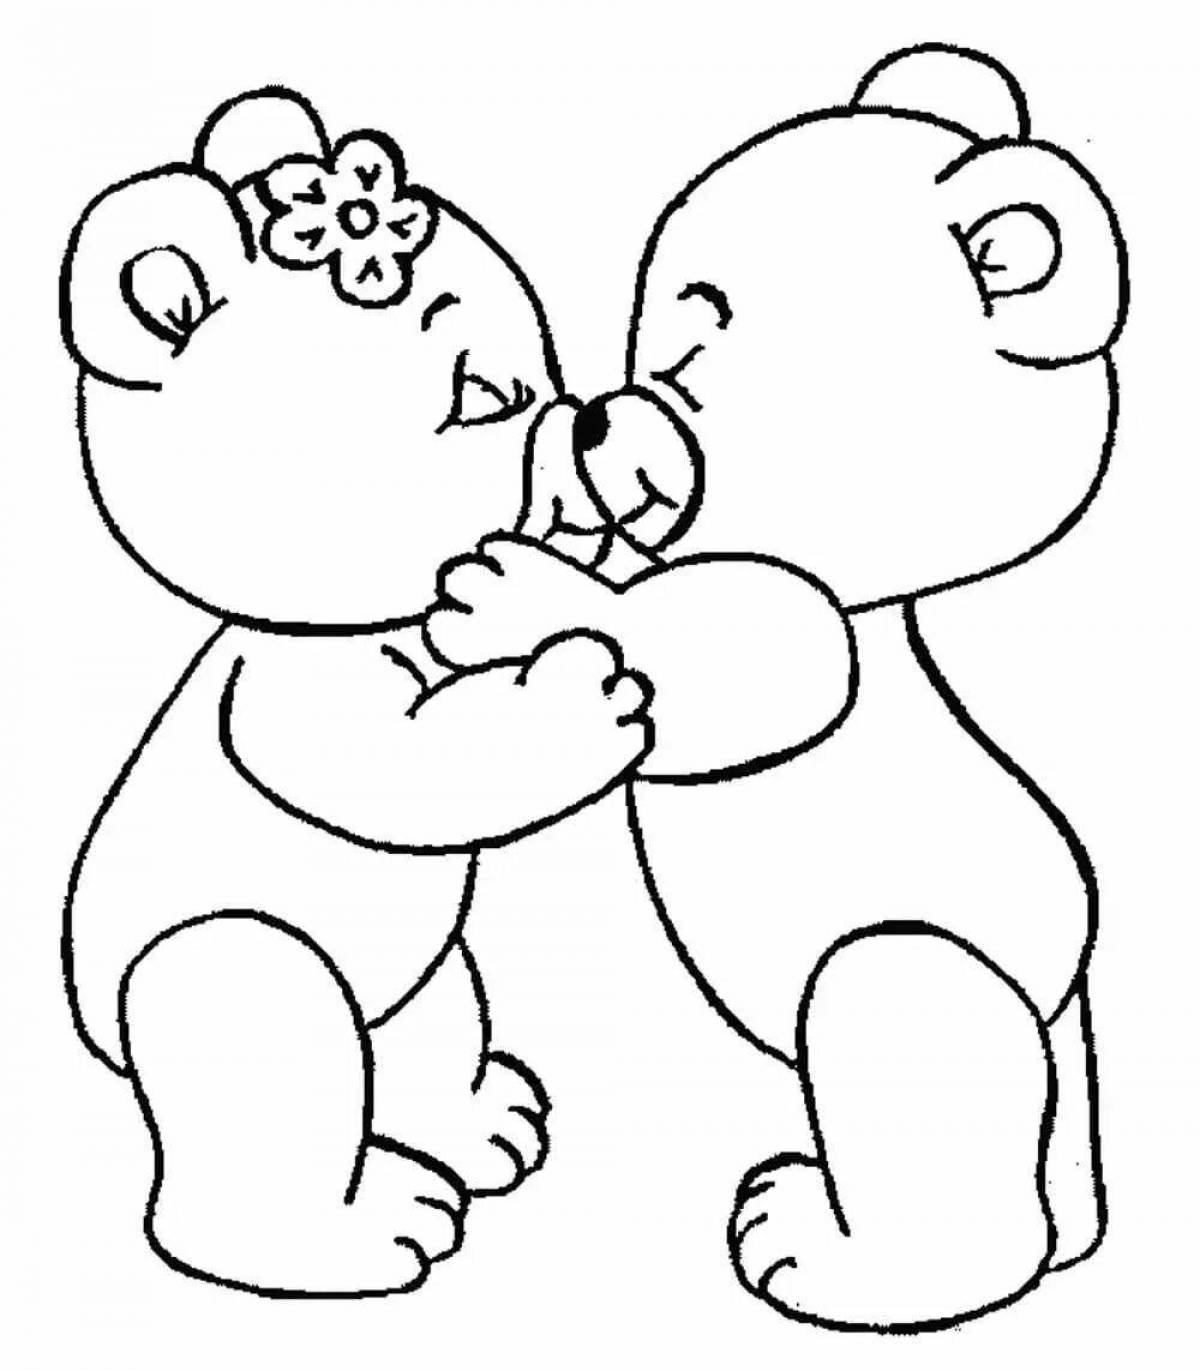 Spicy couple coloring pages